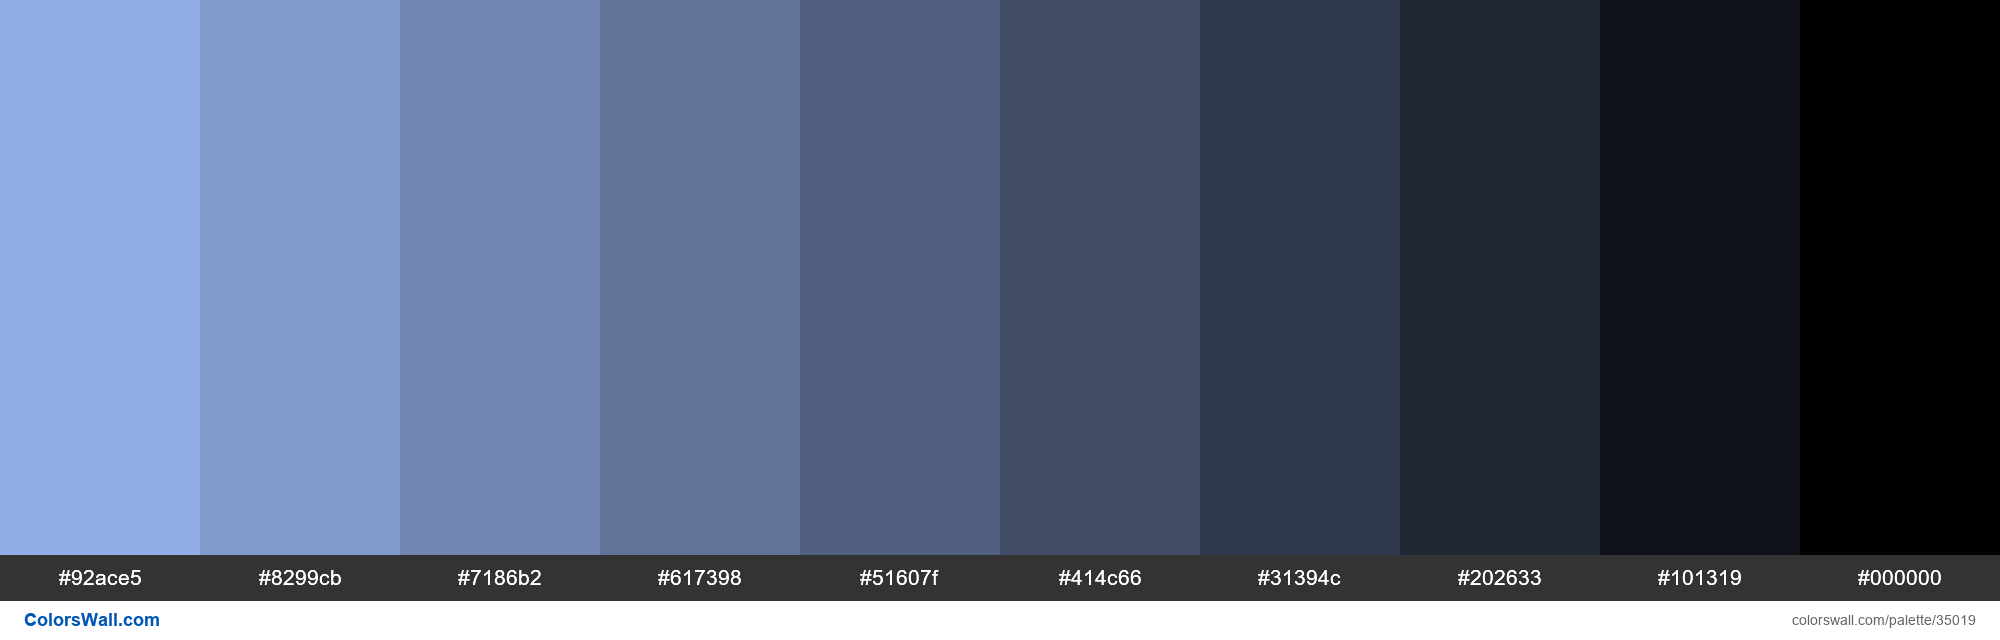 https://colorswall.com/images/palettes/shades-xkcd-color-pastel-blue-a2bffe-hex-35019-colorswall.png